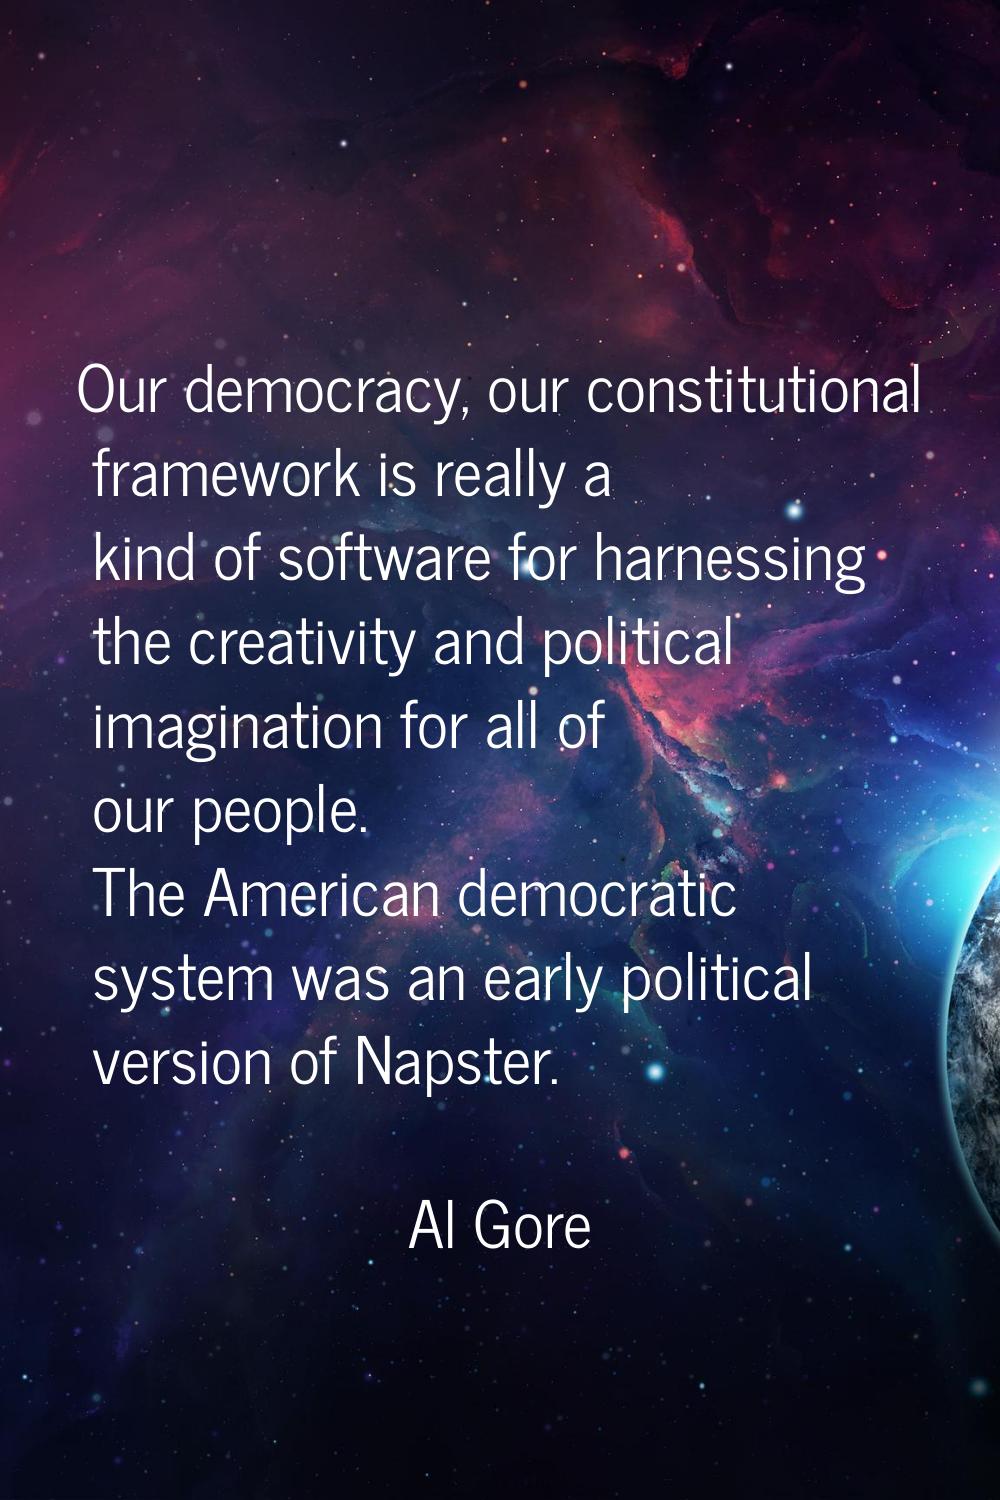 Our democracy, our constitutional framework is really a kind of software for harnessing the creativ